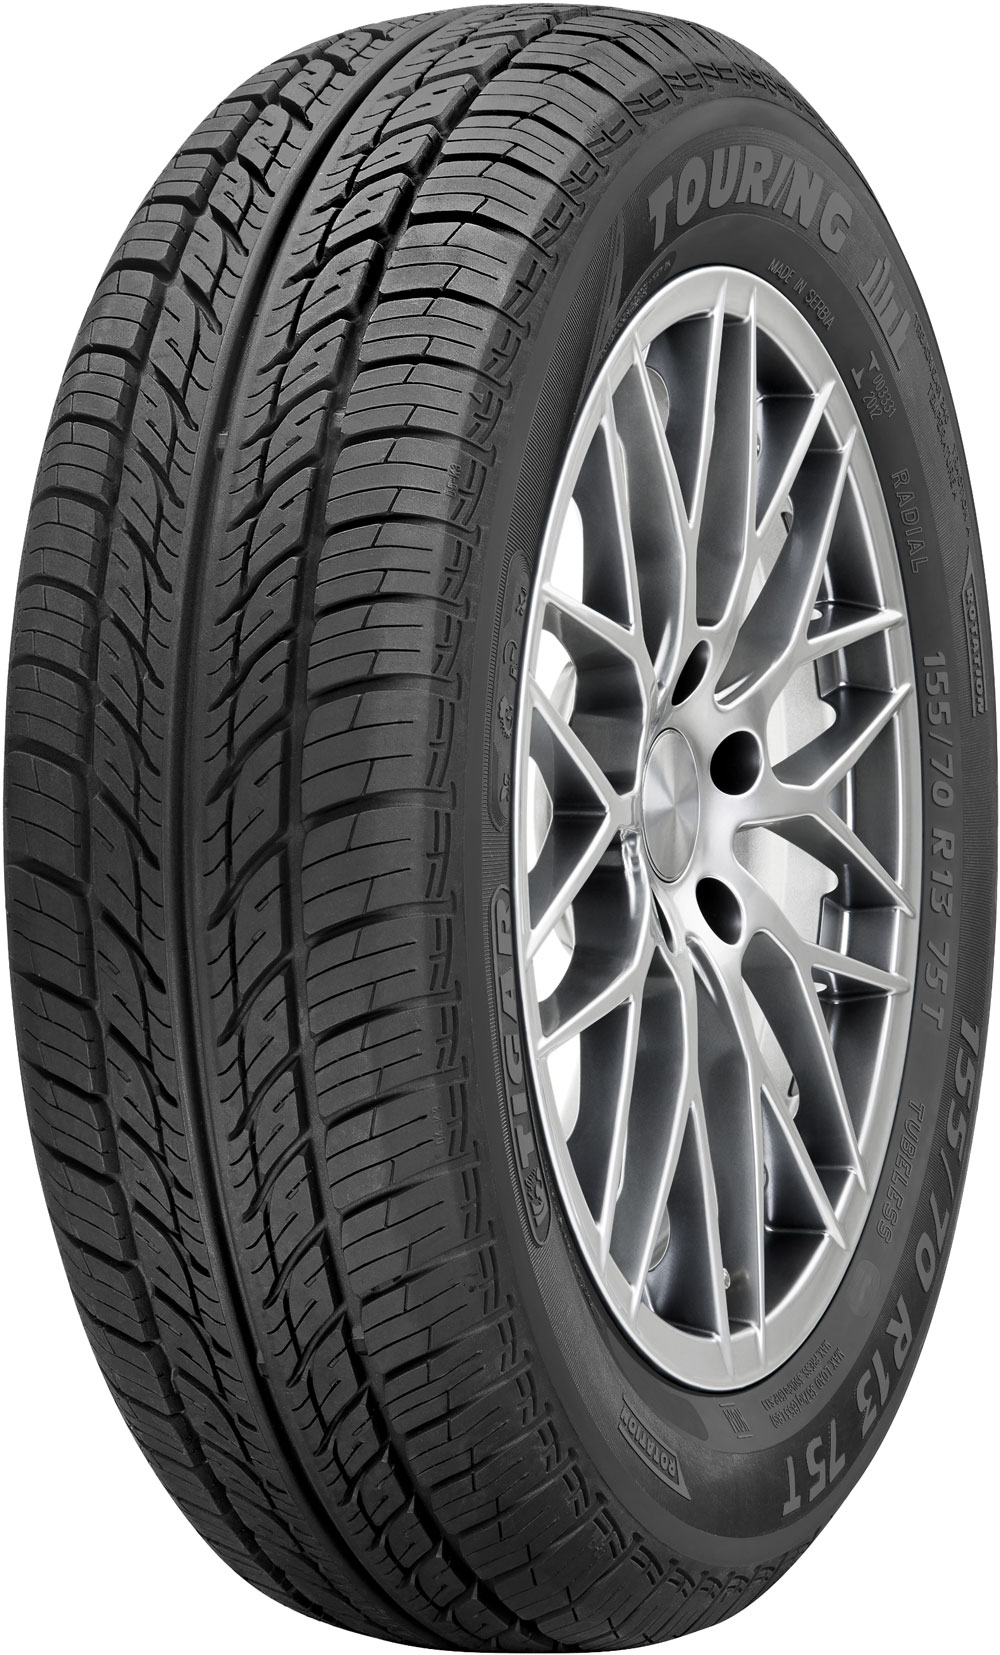 Anvelope auto TIGAR TOURING TG 155/80 R13 79